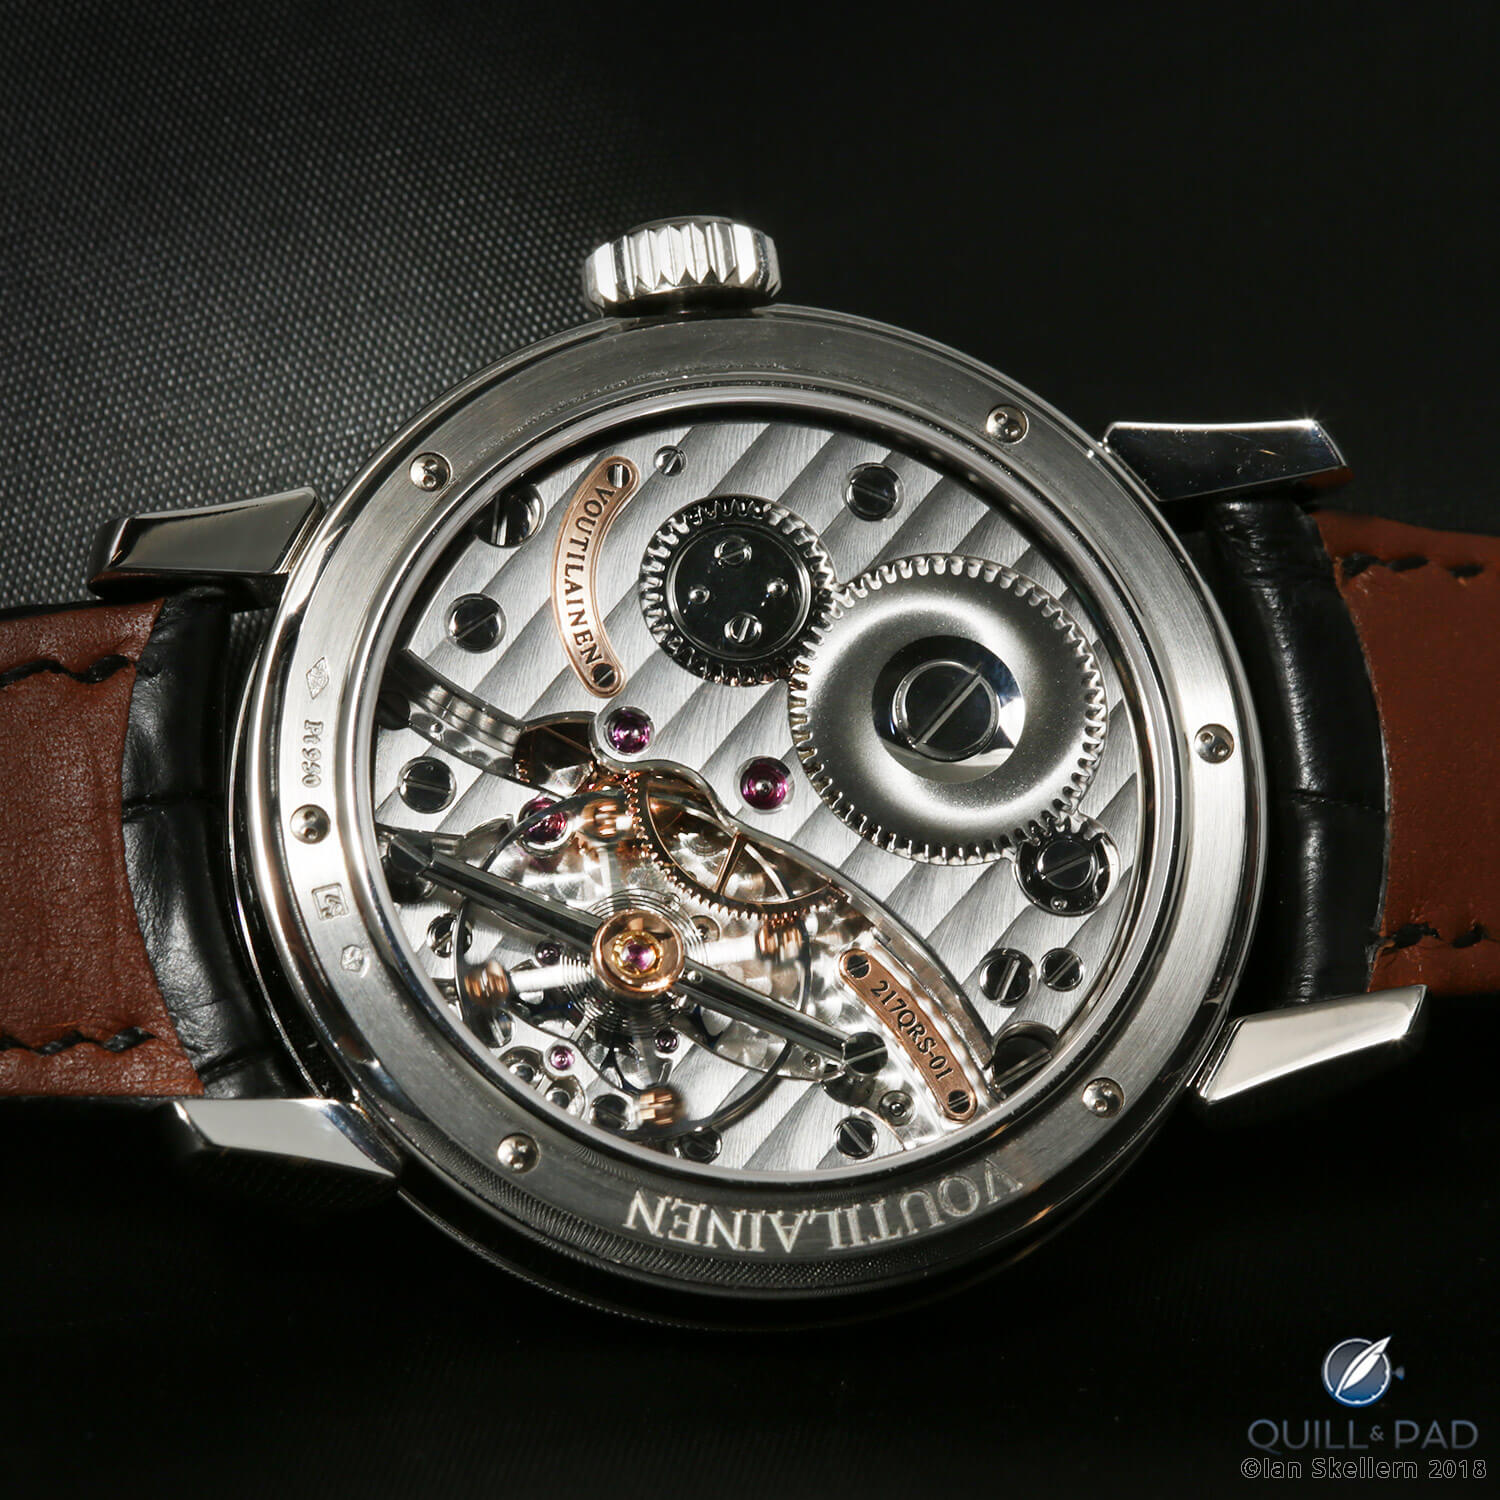 View through the display back of the Kari Voutilainen 217 QRS in white gold